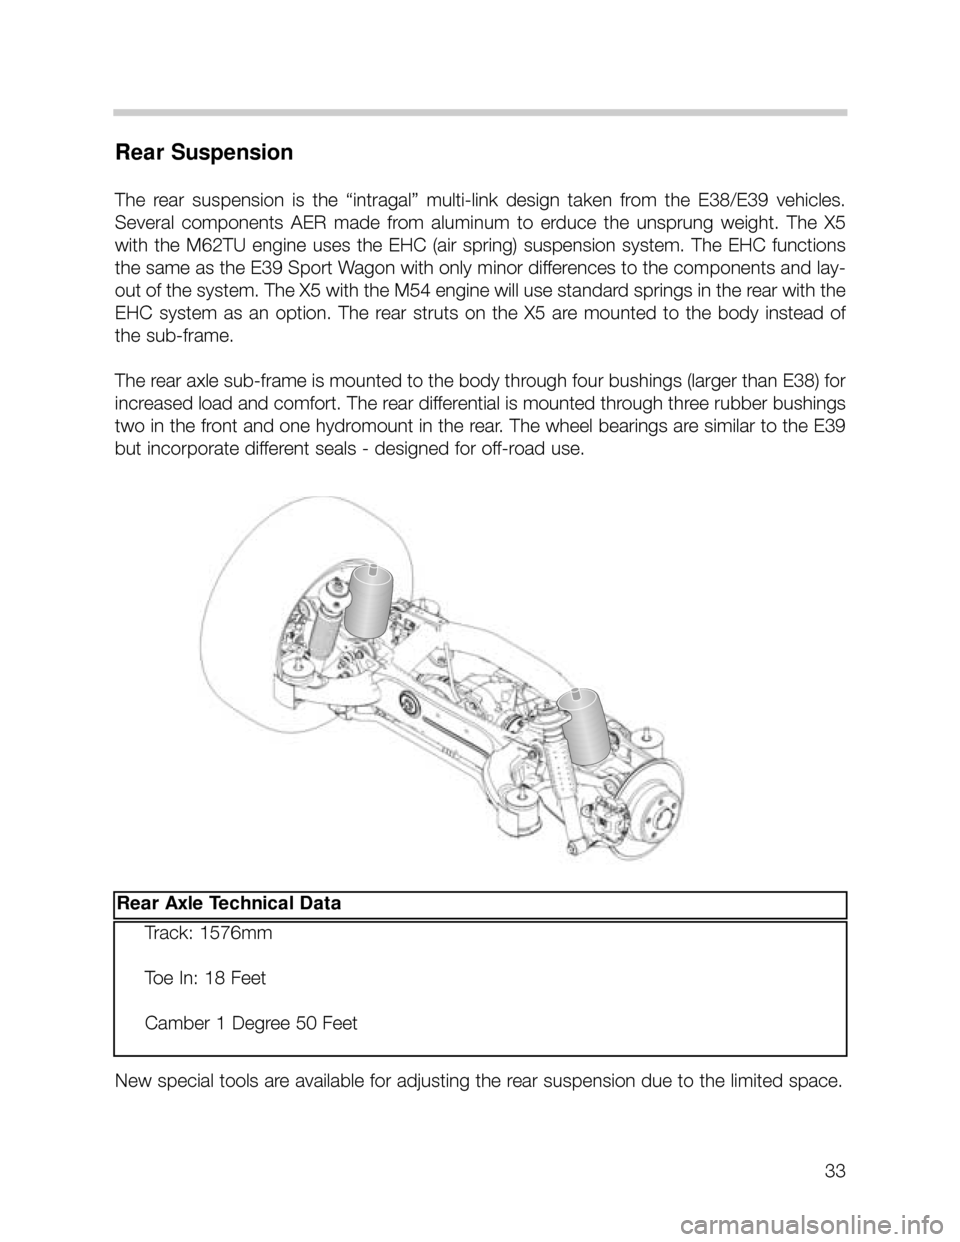 BMW X5 2001 E53 Owners Guide 33
Rear Suspension
The  rear  suspension  is  the  “intragal”  multi-link  design  taken  from  the  E38/E39  vehicles.
Several  components  AER  made  from  aluminum  to  erduce  the  unsprung  w